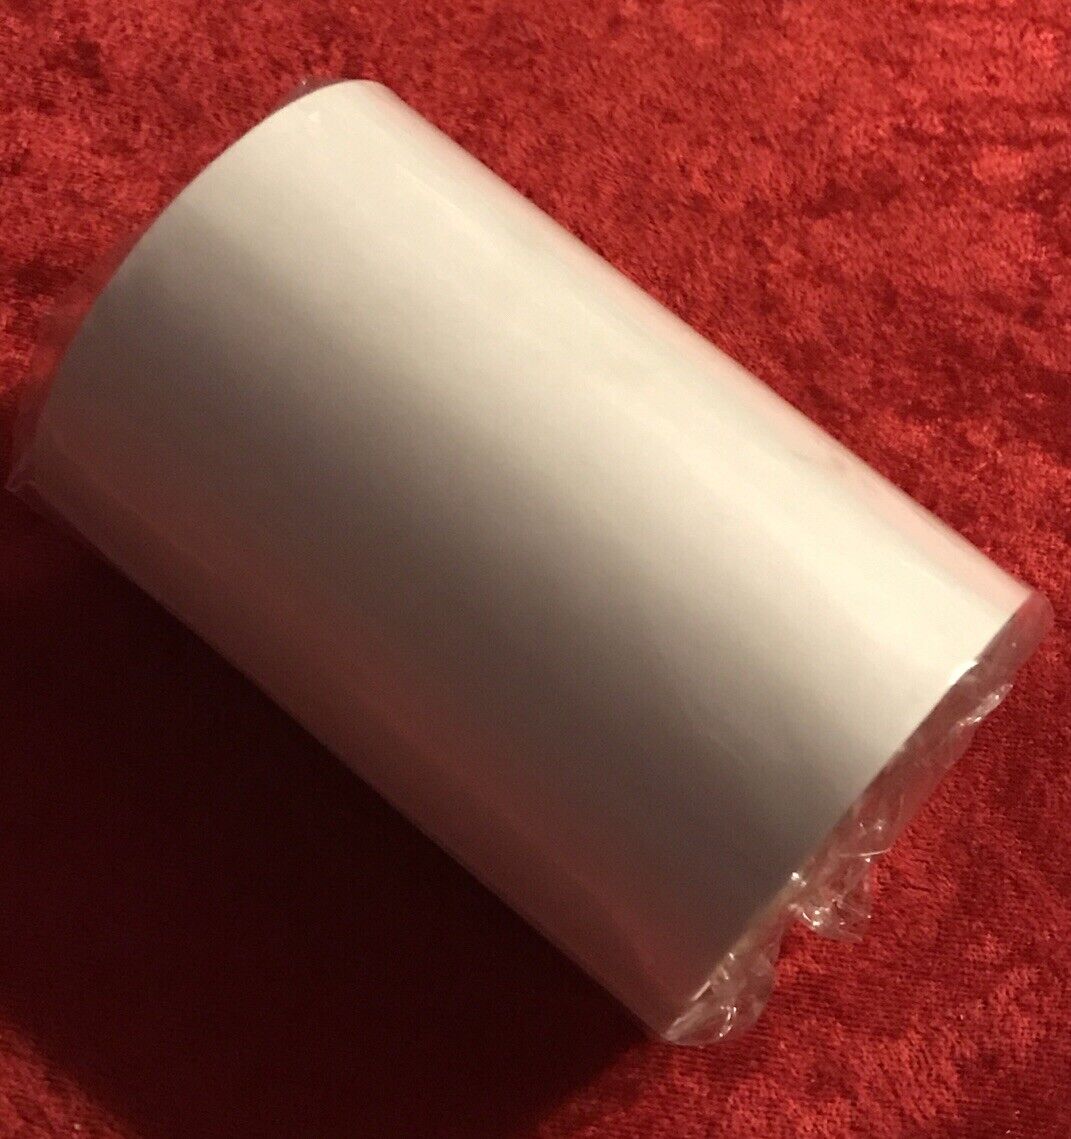 Epson 4”x 24ft Premium Glossy Photo Roll New In Shrink Wrap